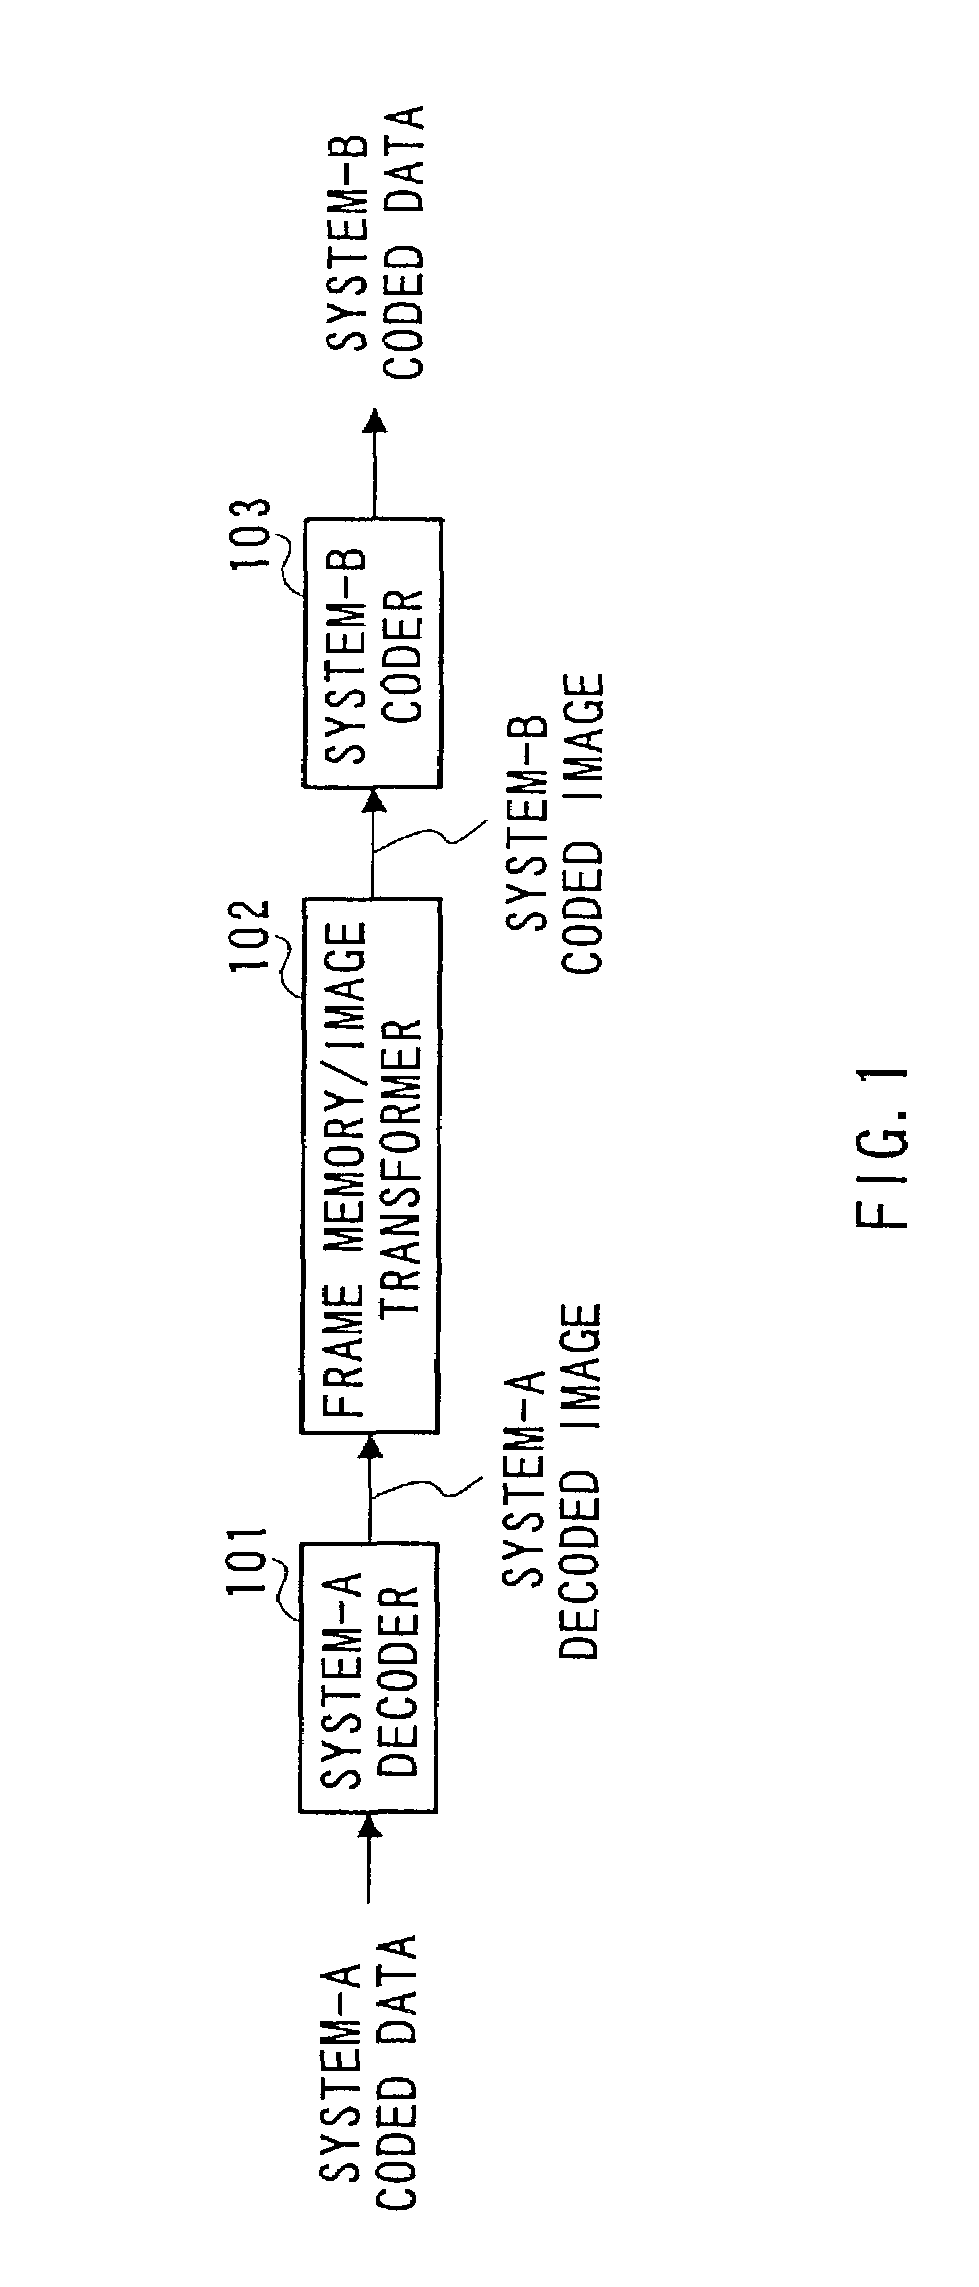 Method and apparatus for transforming moving picture coding system